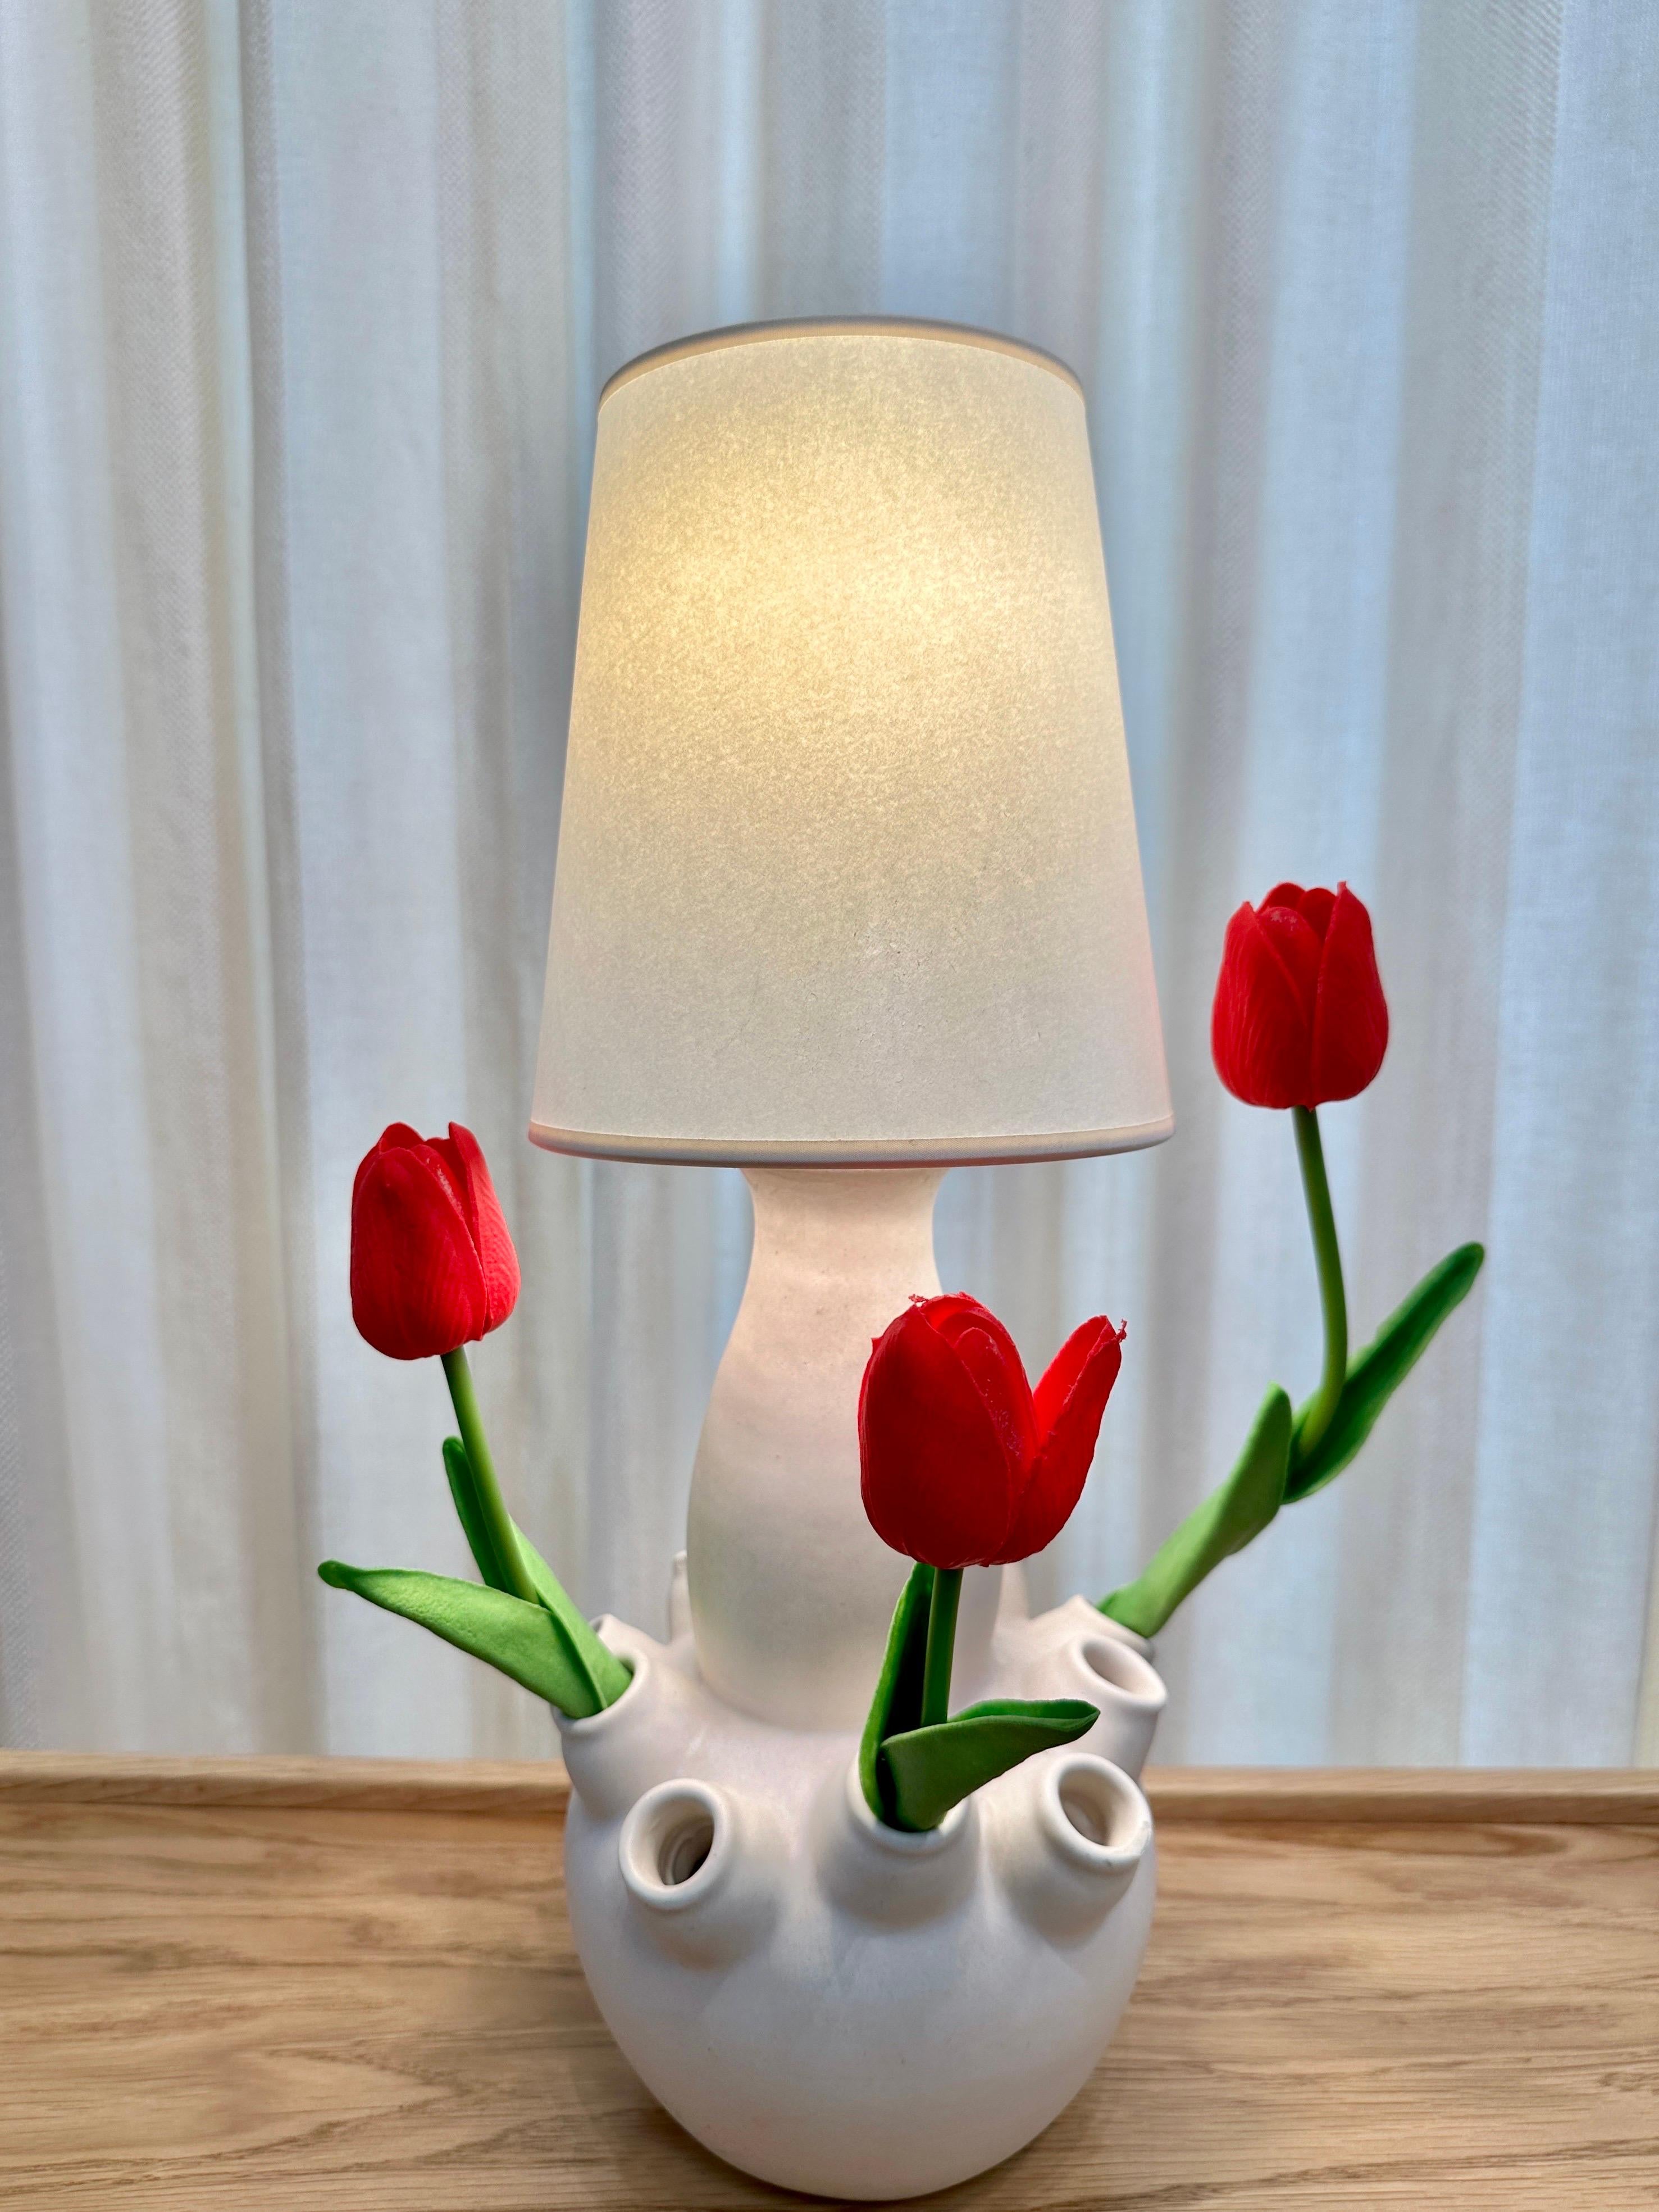 This is an amazing hand-crafted mid-century French Ceramic bud vase/ table lamp by Louis Giraud, Vallauris, 1950s.  It is usable as a flower vase with openings all around the base in creamy tone.  The lamp has been rewired to its original beauty and